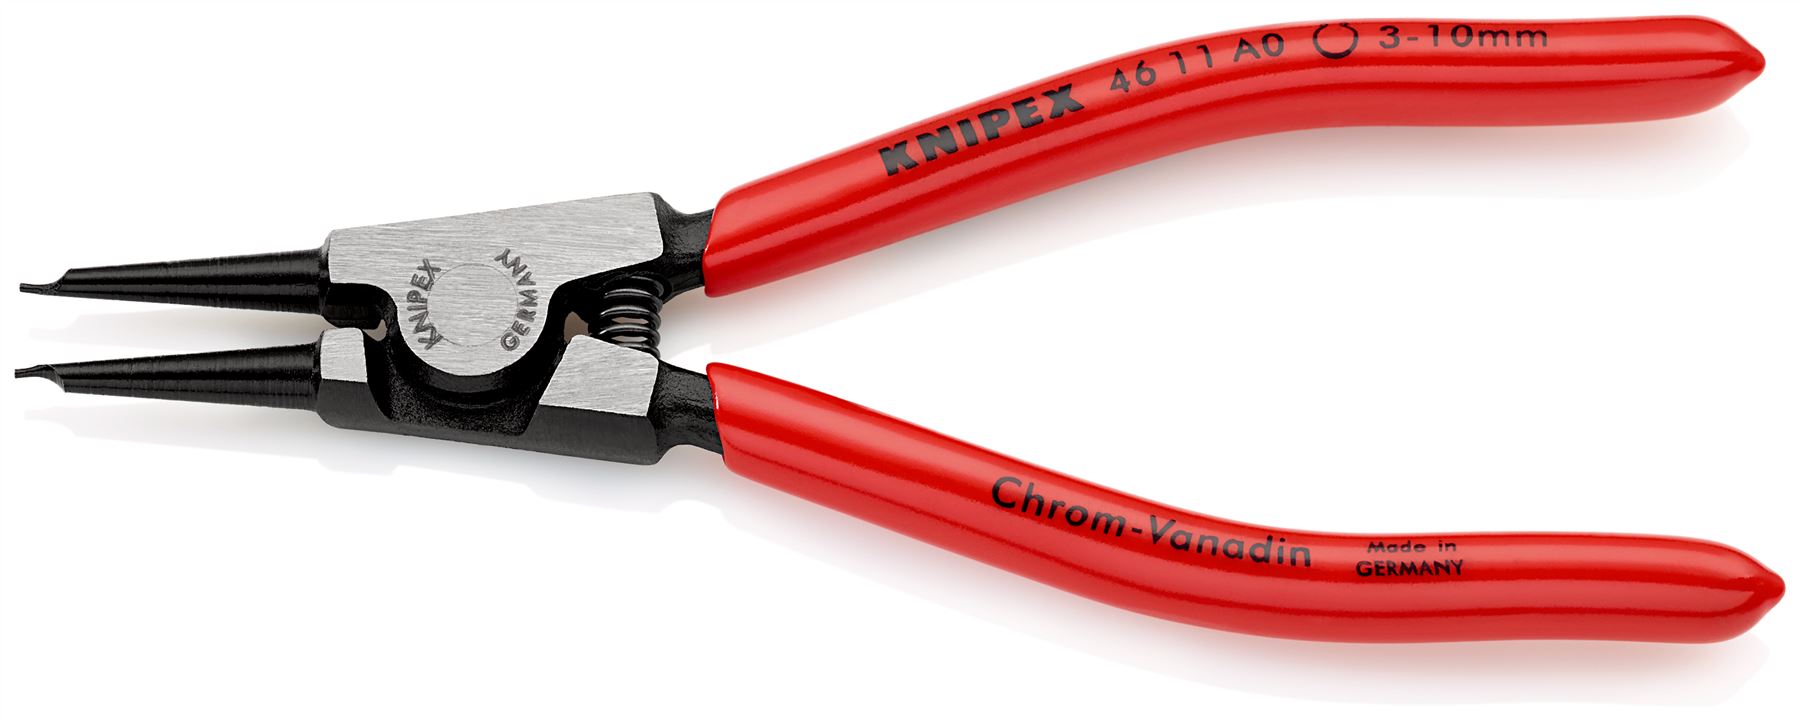 KNIPEX Circlip Pliers for External Circlips on Shafts 140mm 0.9mm Diameter Tips 46 11 A0 SB